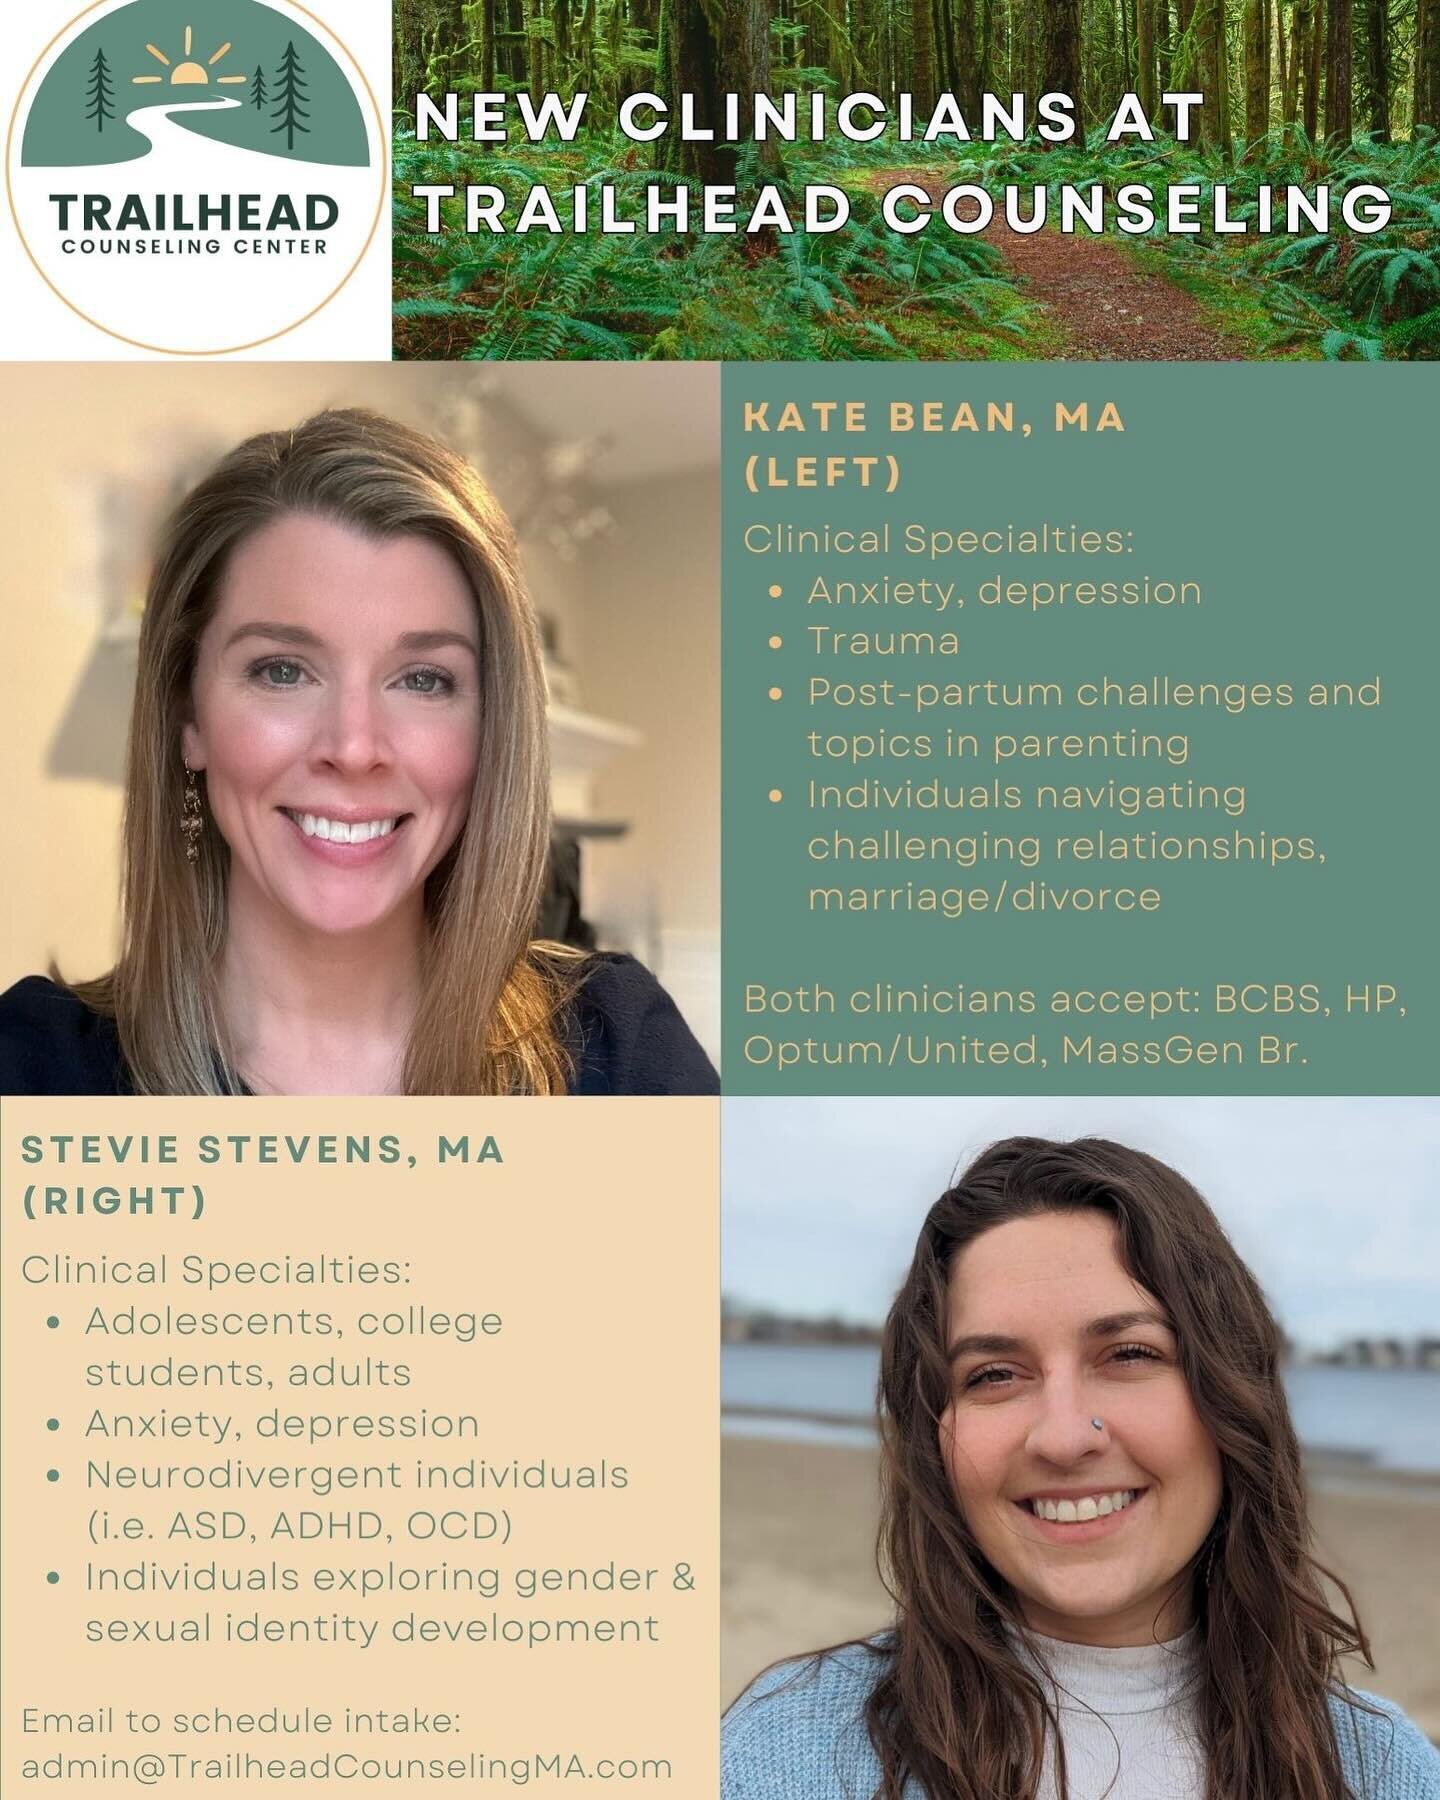 So excited to welcome two clinicians to the Trailhead Counseling team!! ✨✨Currently accepting referrals for in person, walk-and-talk and virtual appointments. ✨